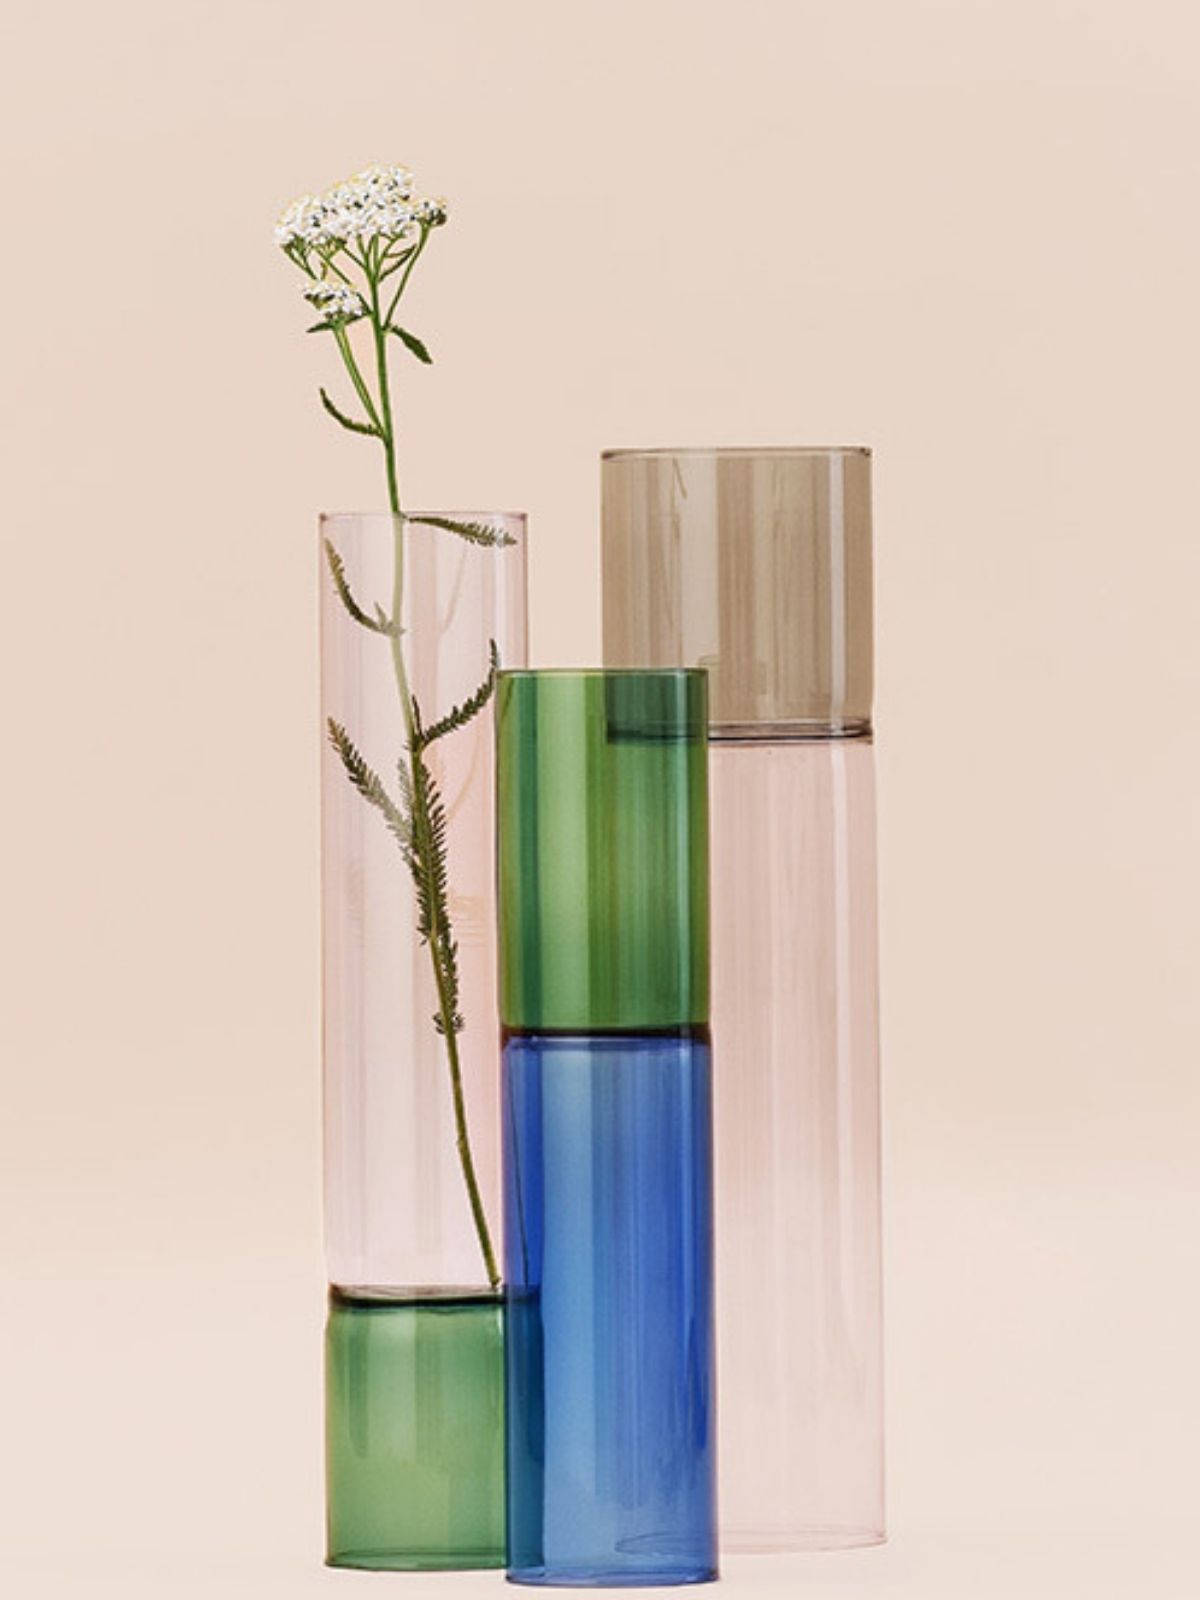 Anna Perugini- Reversible Vases Inspired by Bamboo Stems - StudioInternazionale - group of three glass vases one flowwer - on thursd